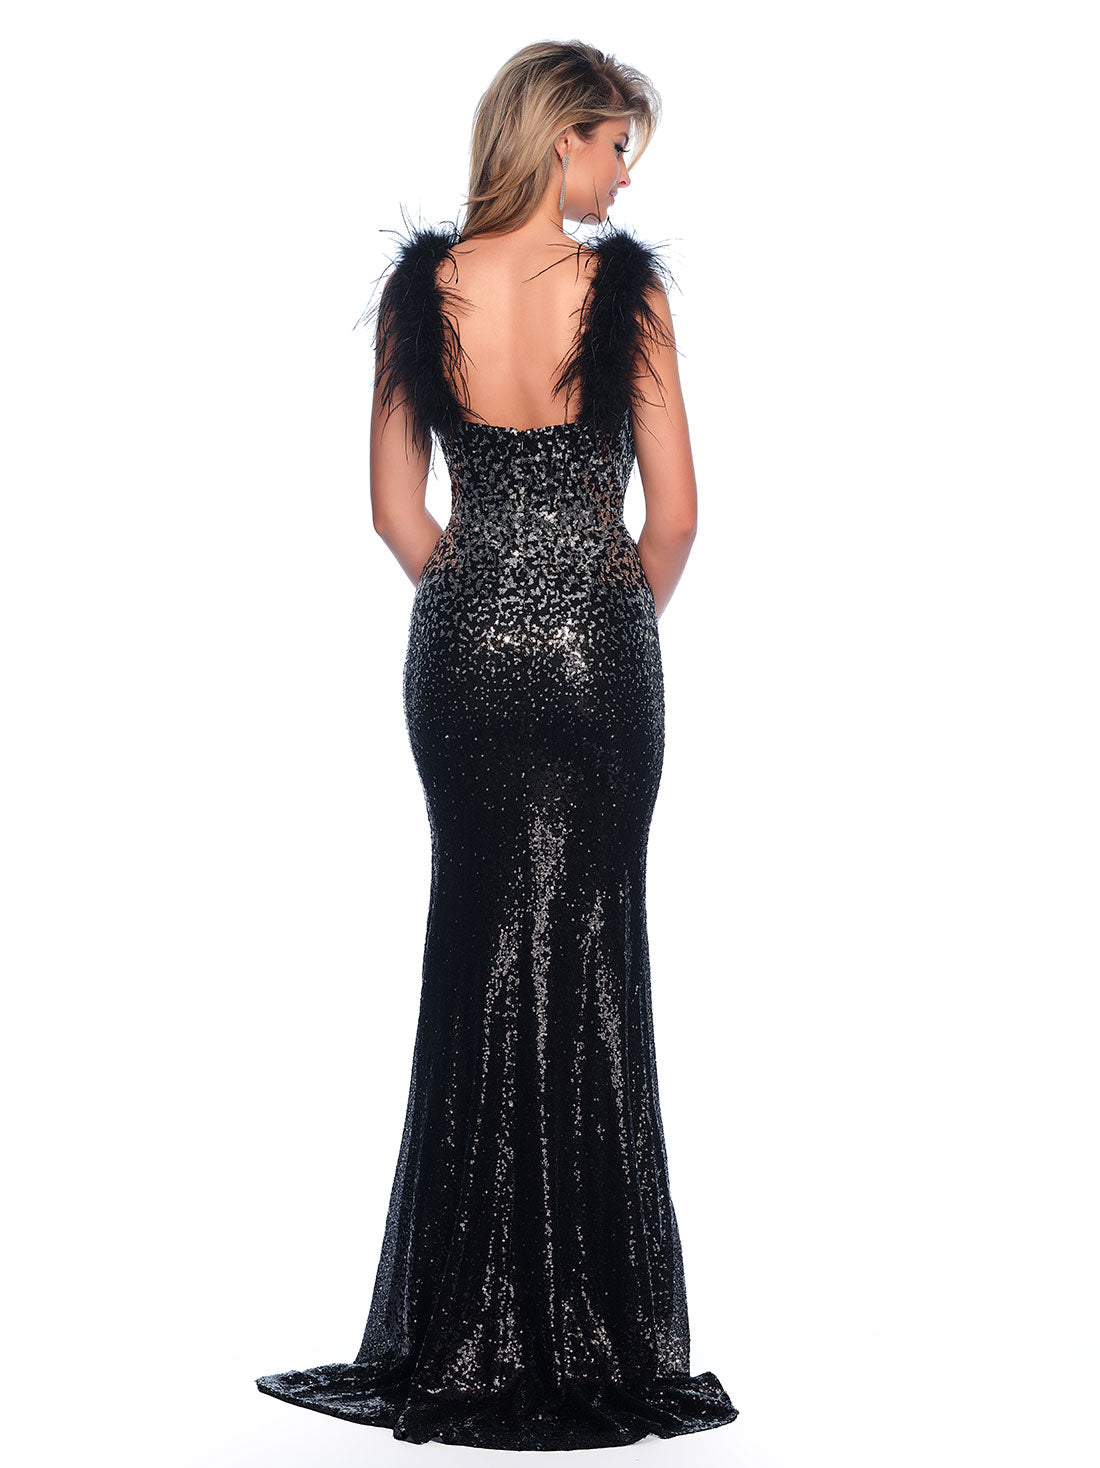 SEQUIN BODYCON DRESS WITH FEATHERED STRAPS